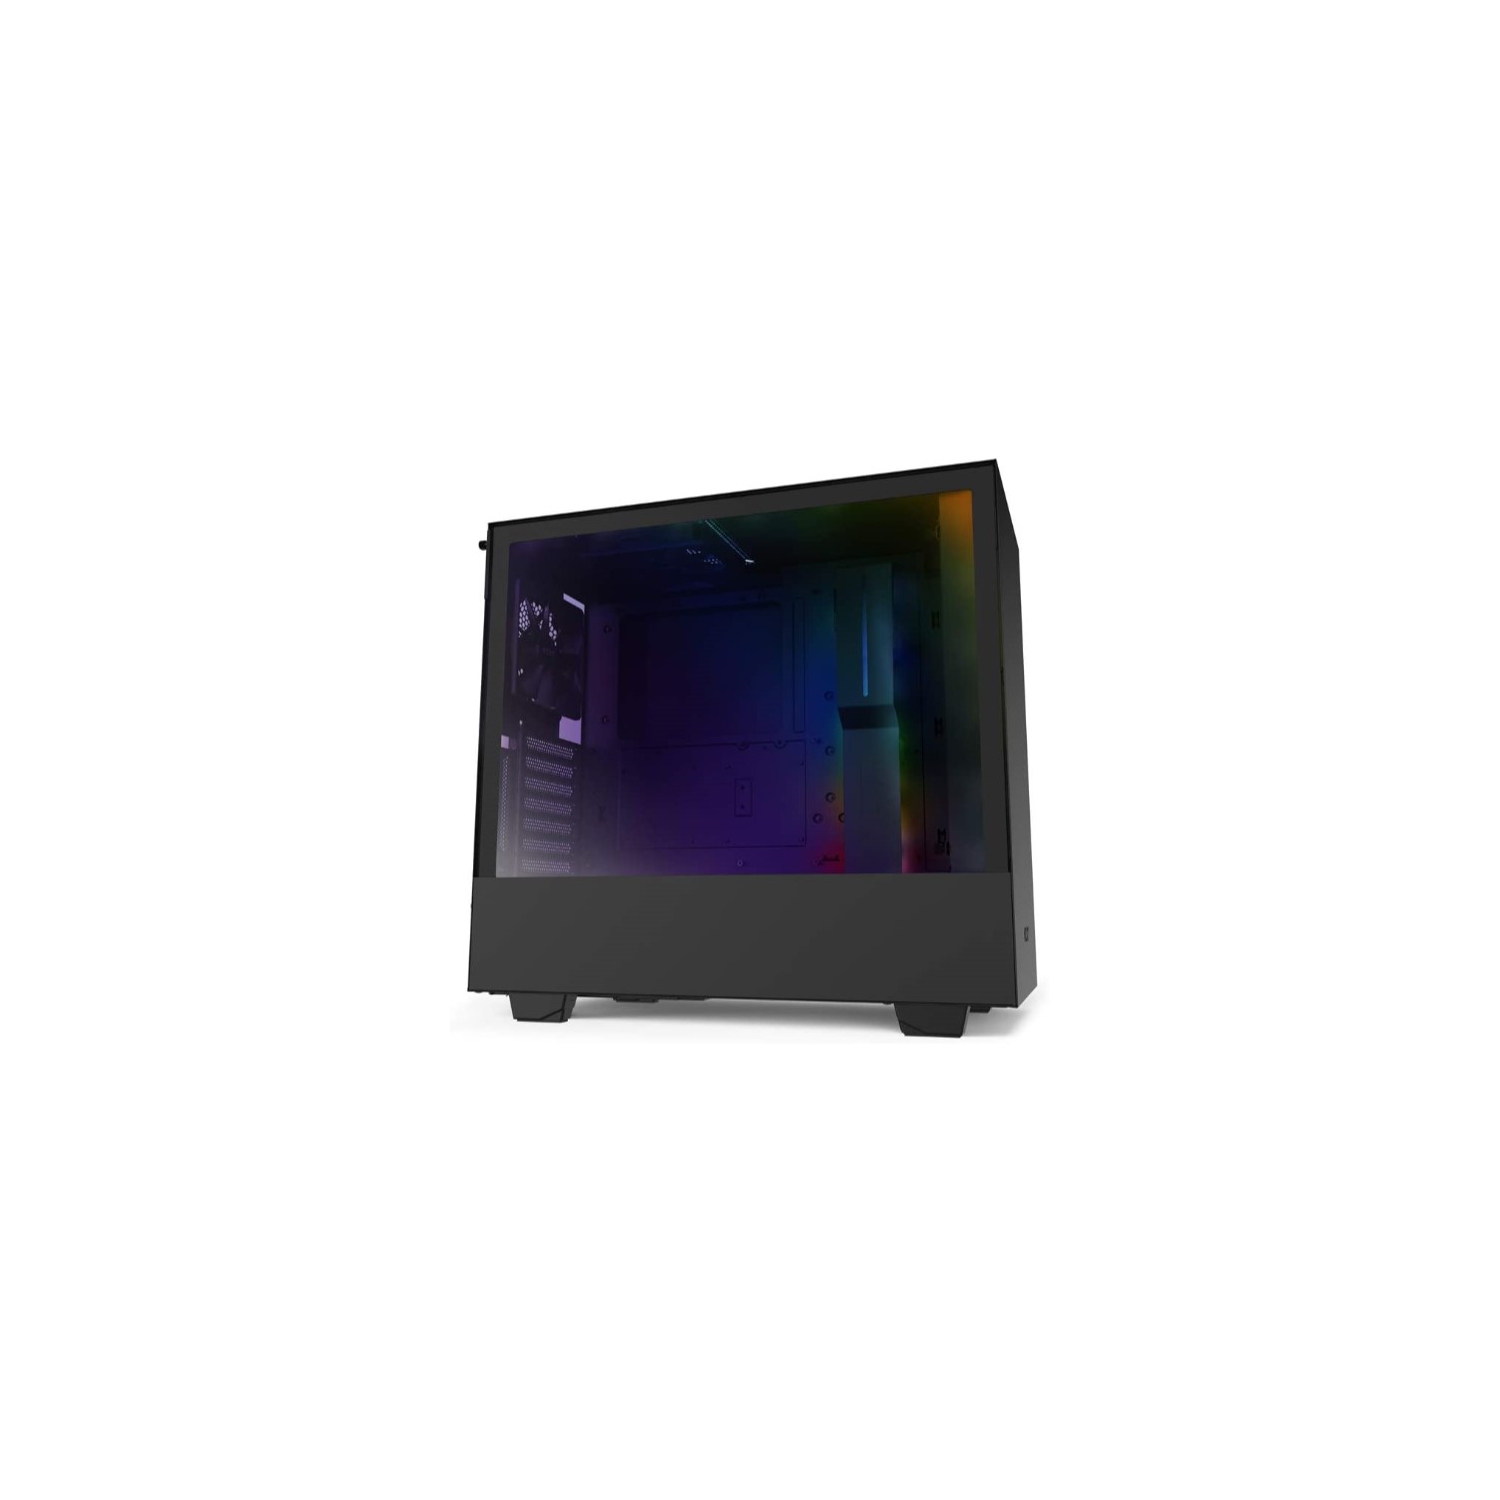 NZXT H510i - CA-H510i-B1 - Compact ATX Mid-Tower PC Gaming Case - Front I/O USB Type-C Port - Tempered Glass Side Panel - Integrated RGB Lighting - Black